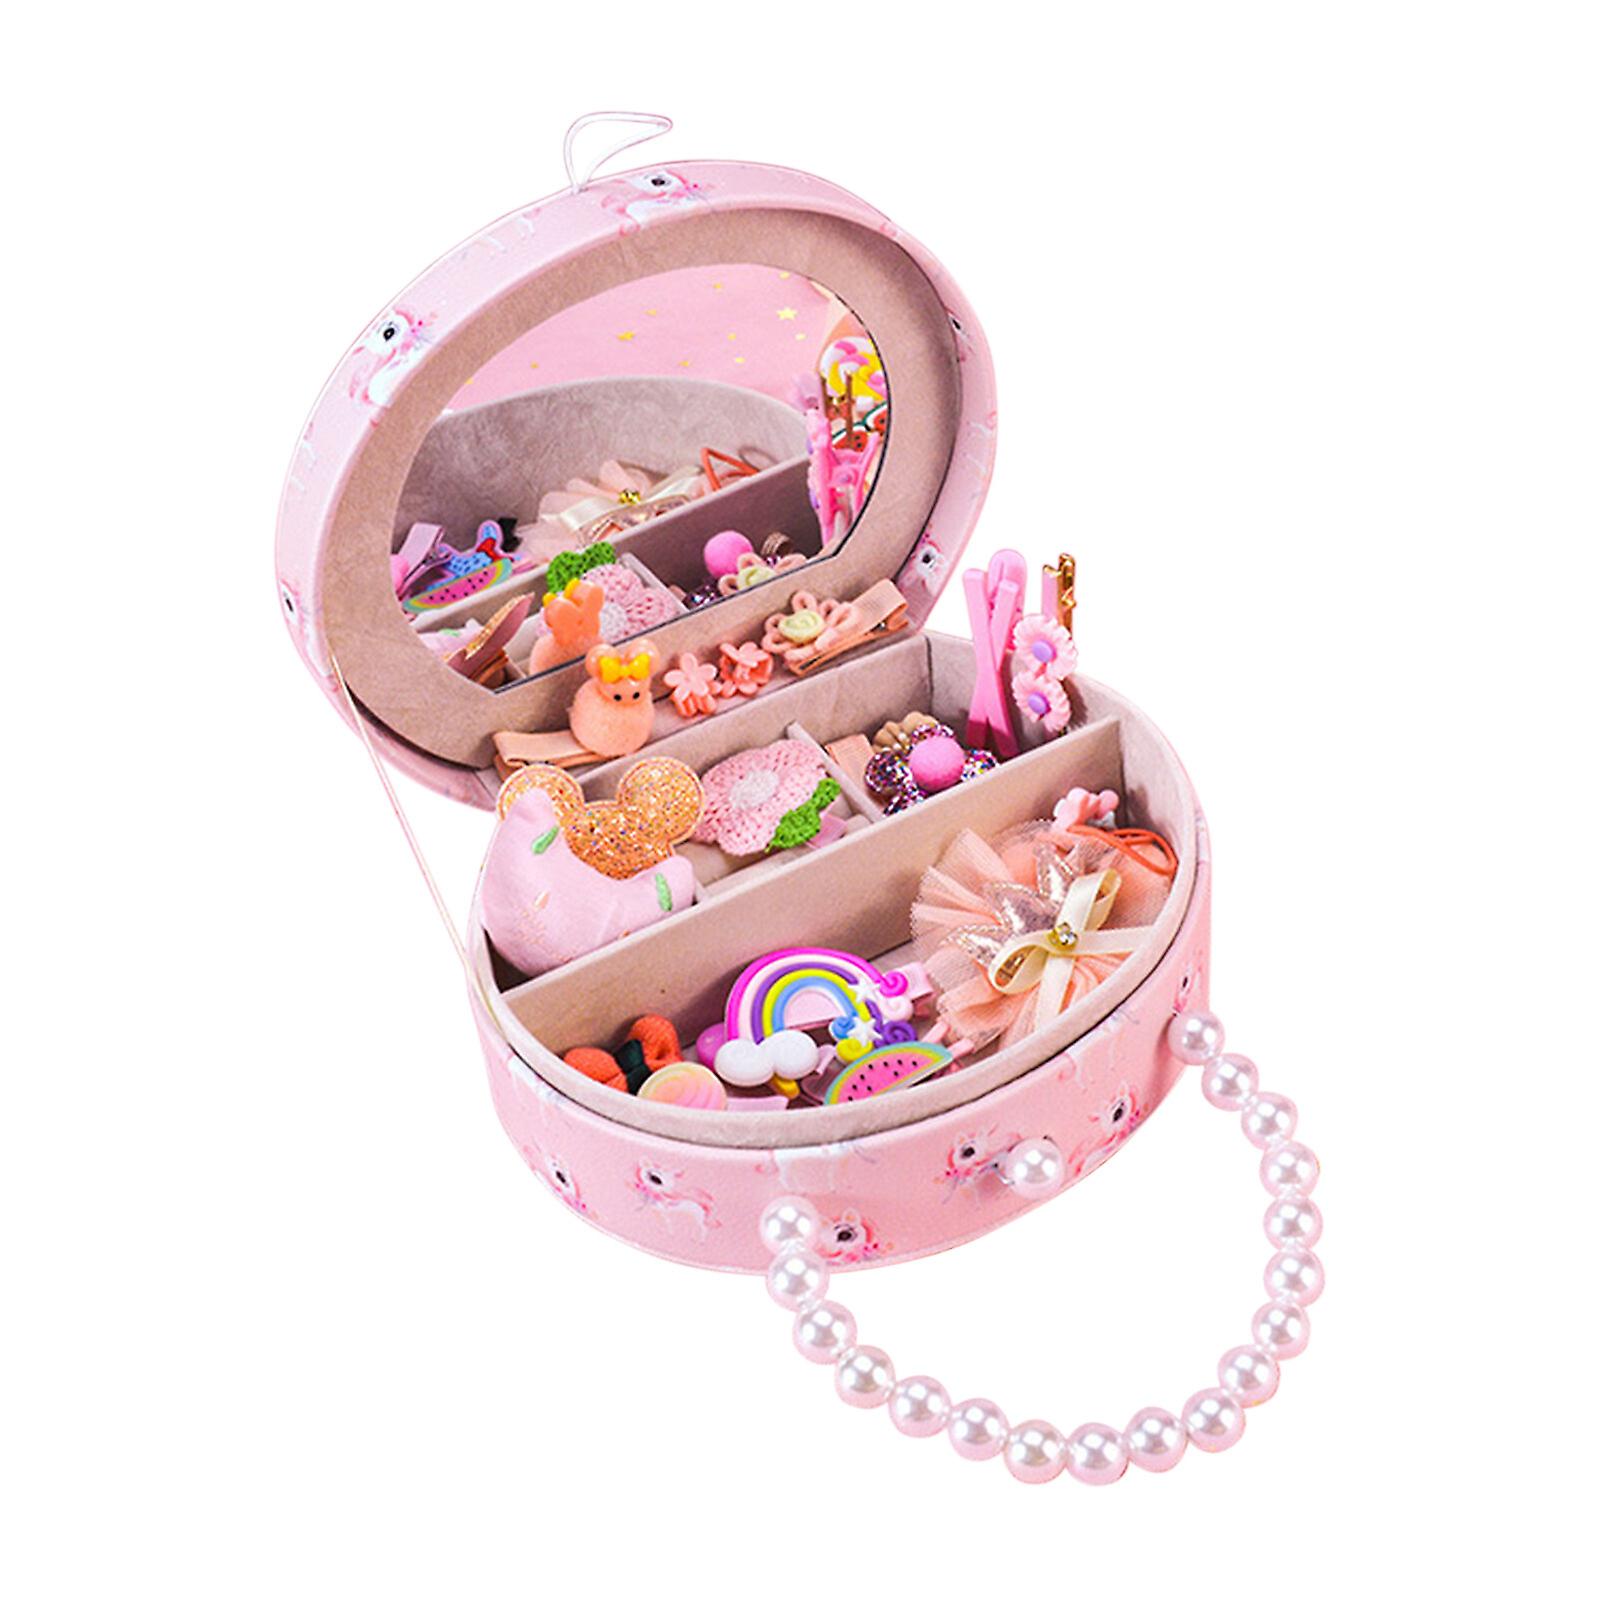 Tiny Tots & Trinkets: Choosing the Perfect Toddler Jewelry Box插图3